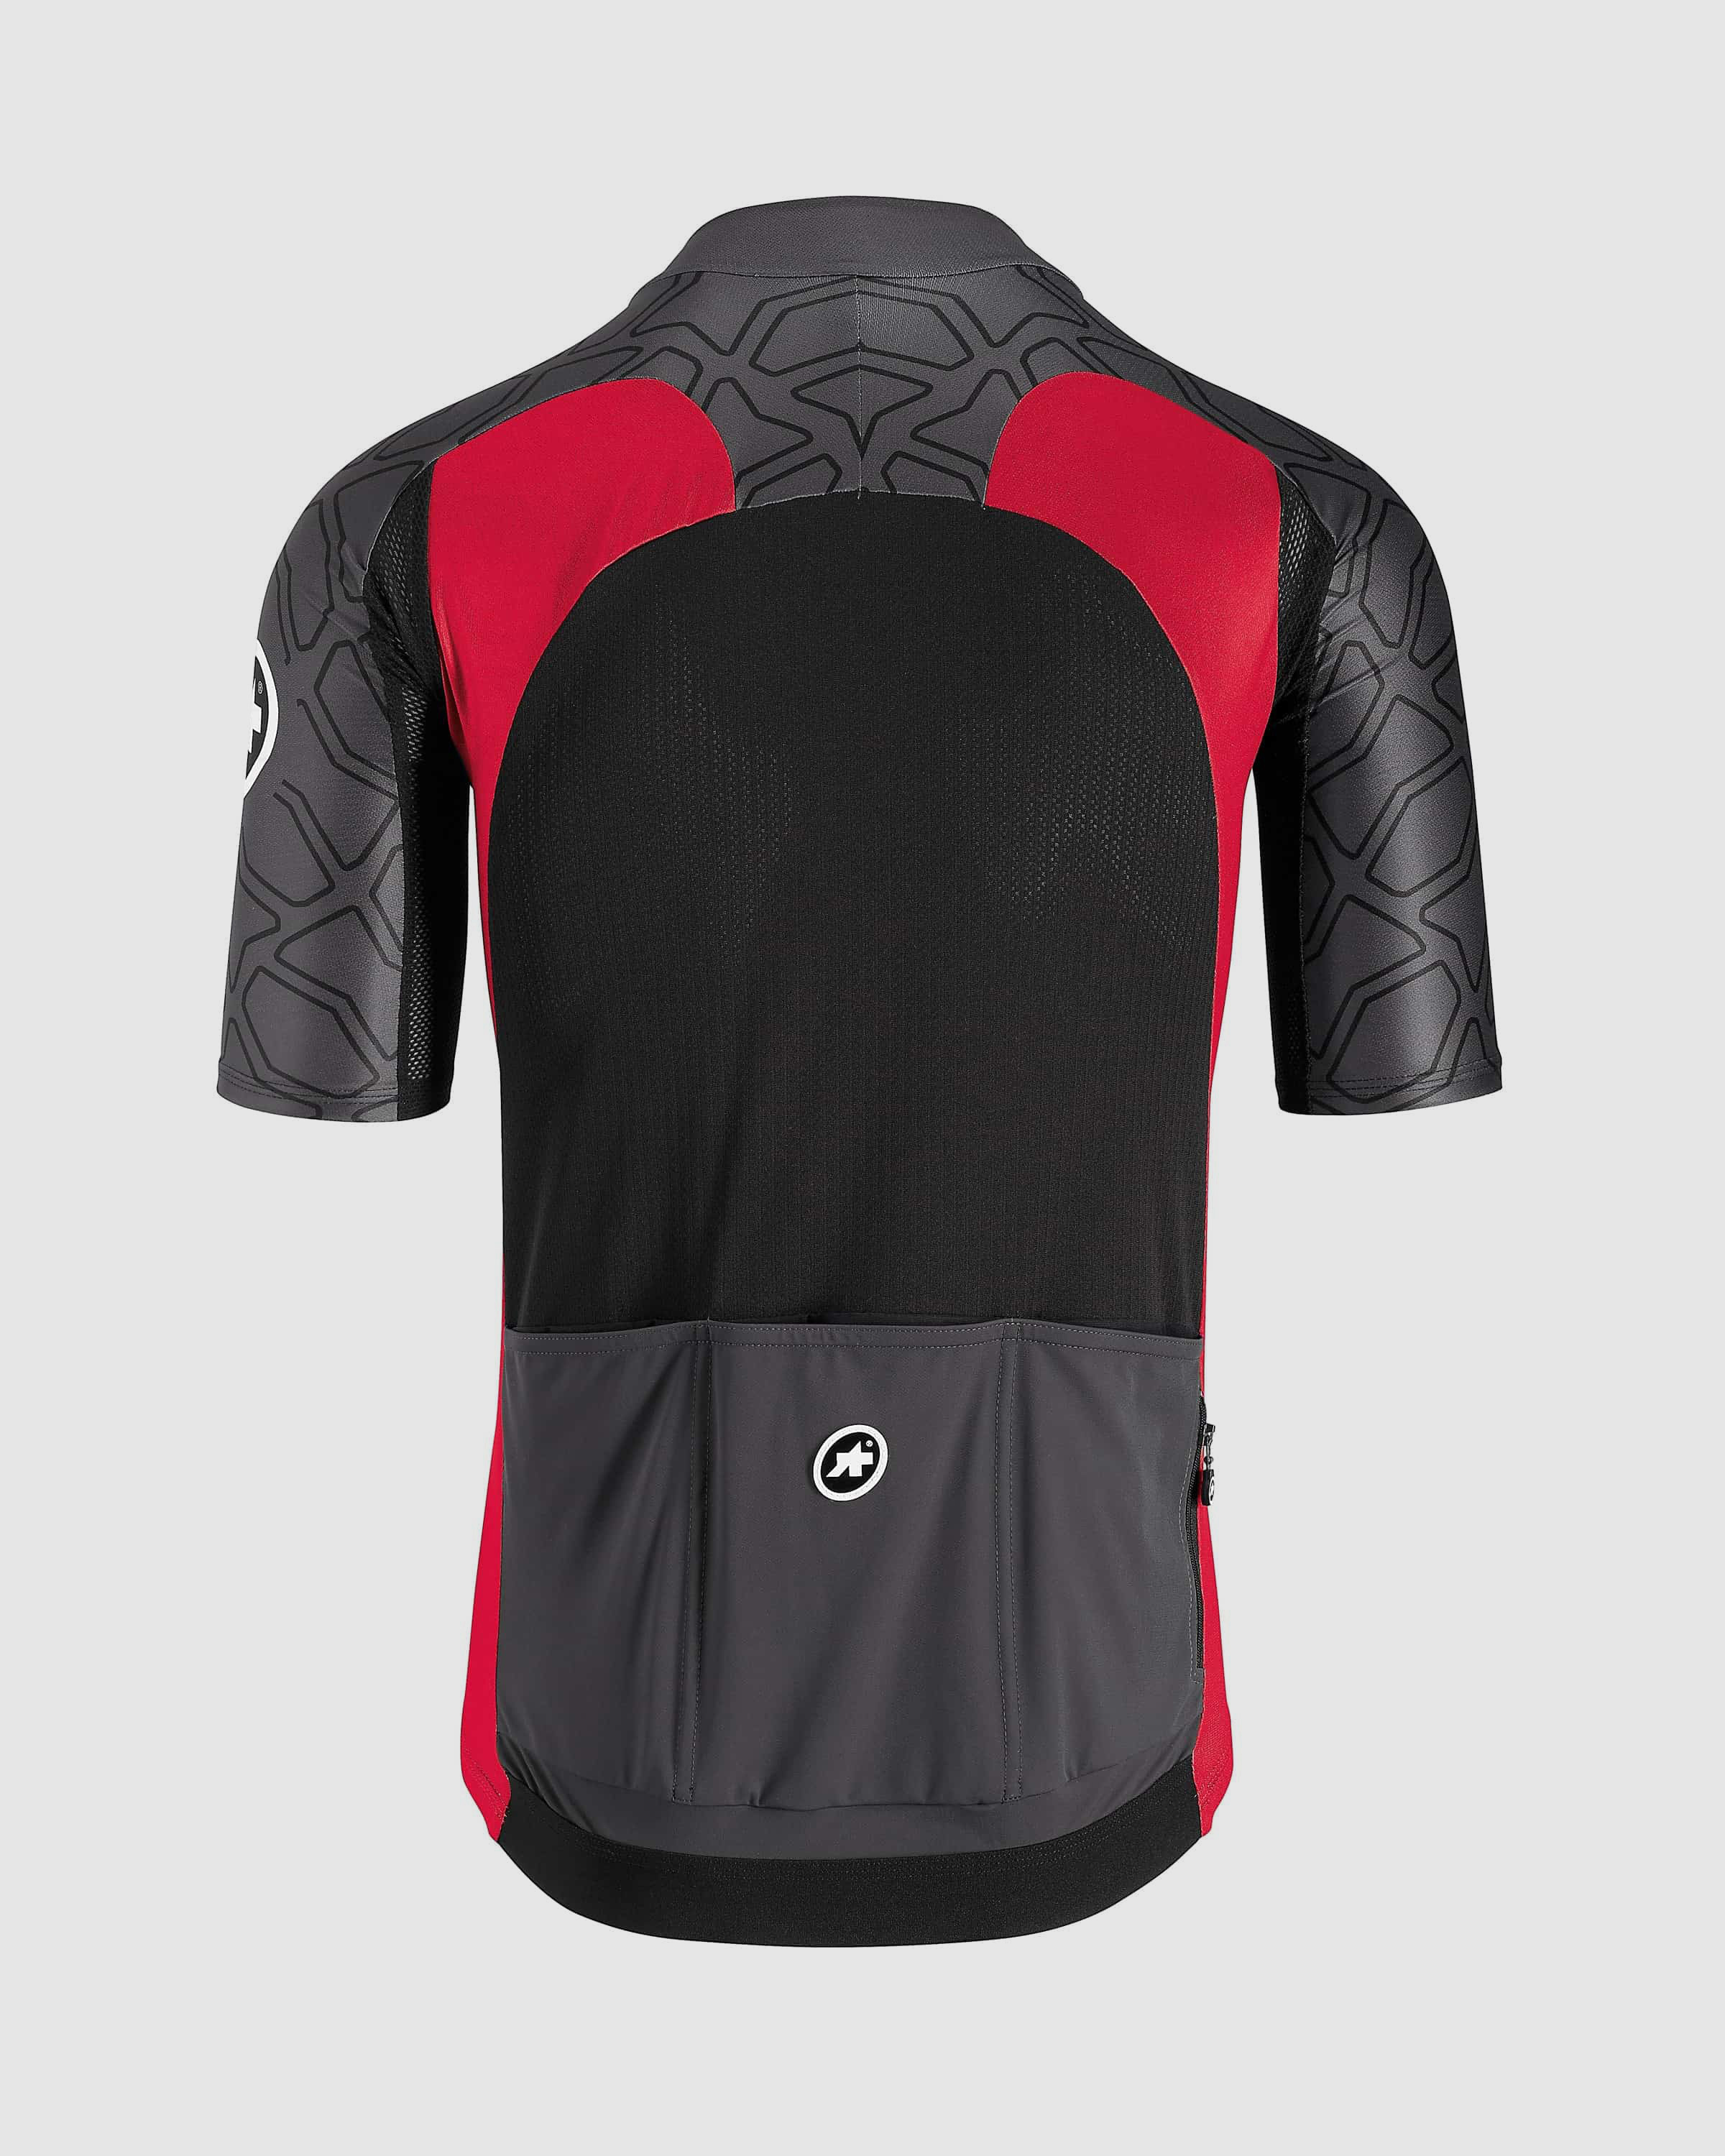 XC short sleeve jersey - ASSOS Of Switzerland - Official Outlet